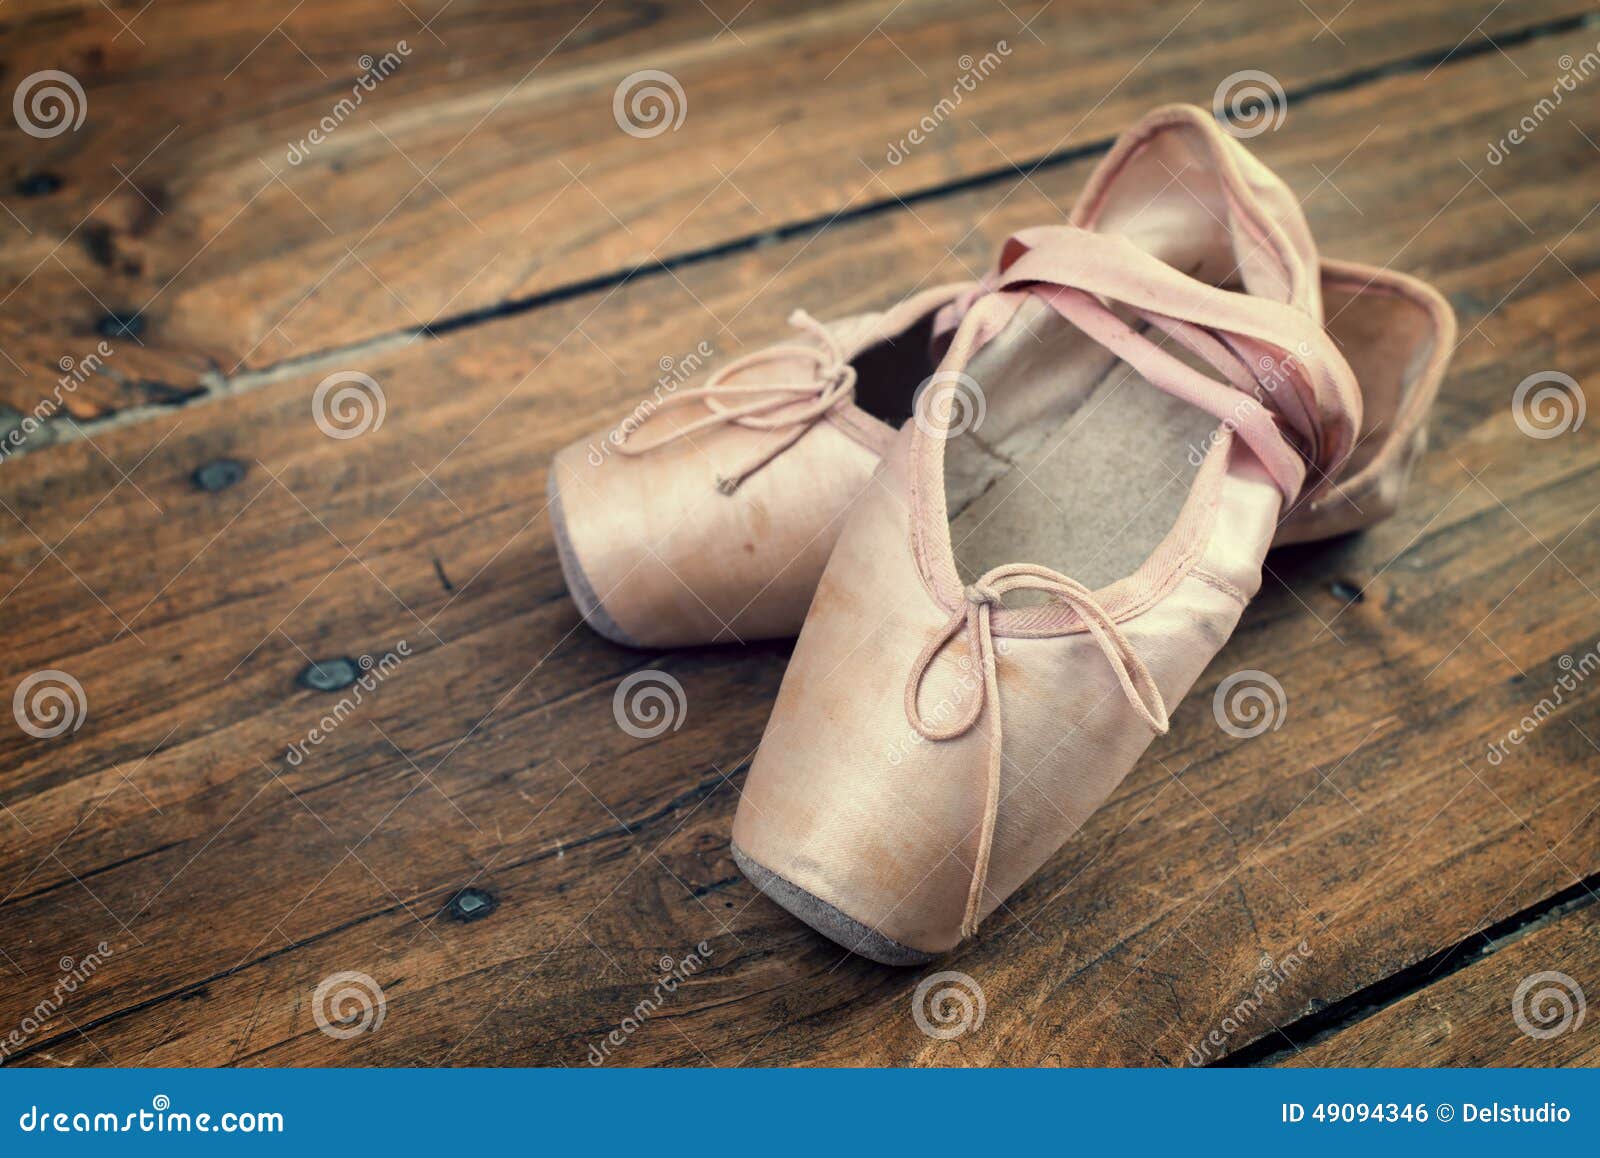 Old Pink Ballet Shoes on a Wooden Floor Stock Photo - Image of wooden ...